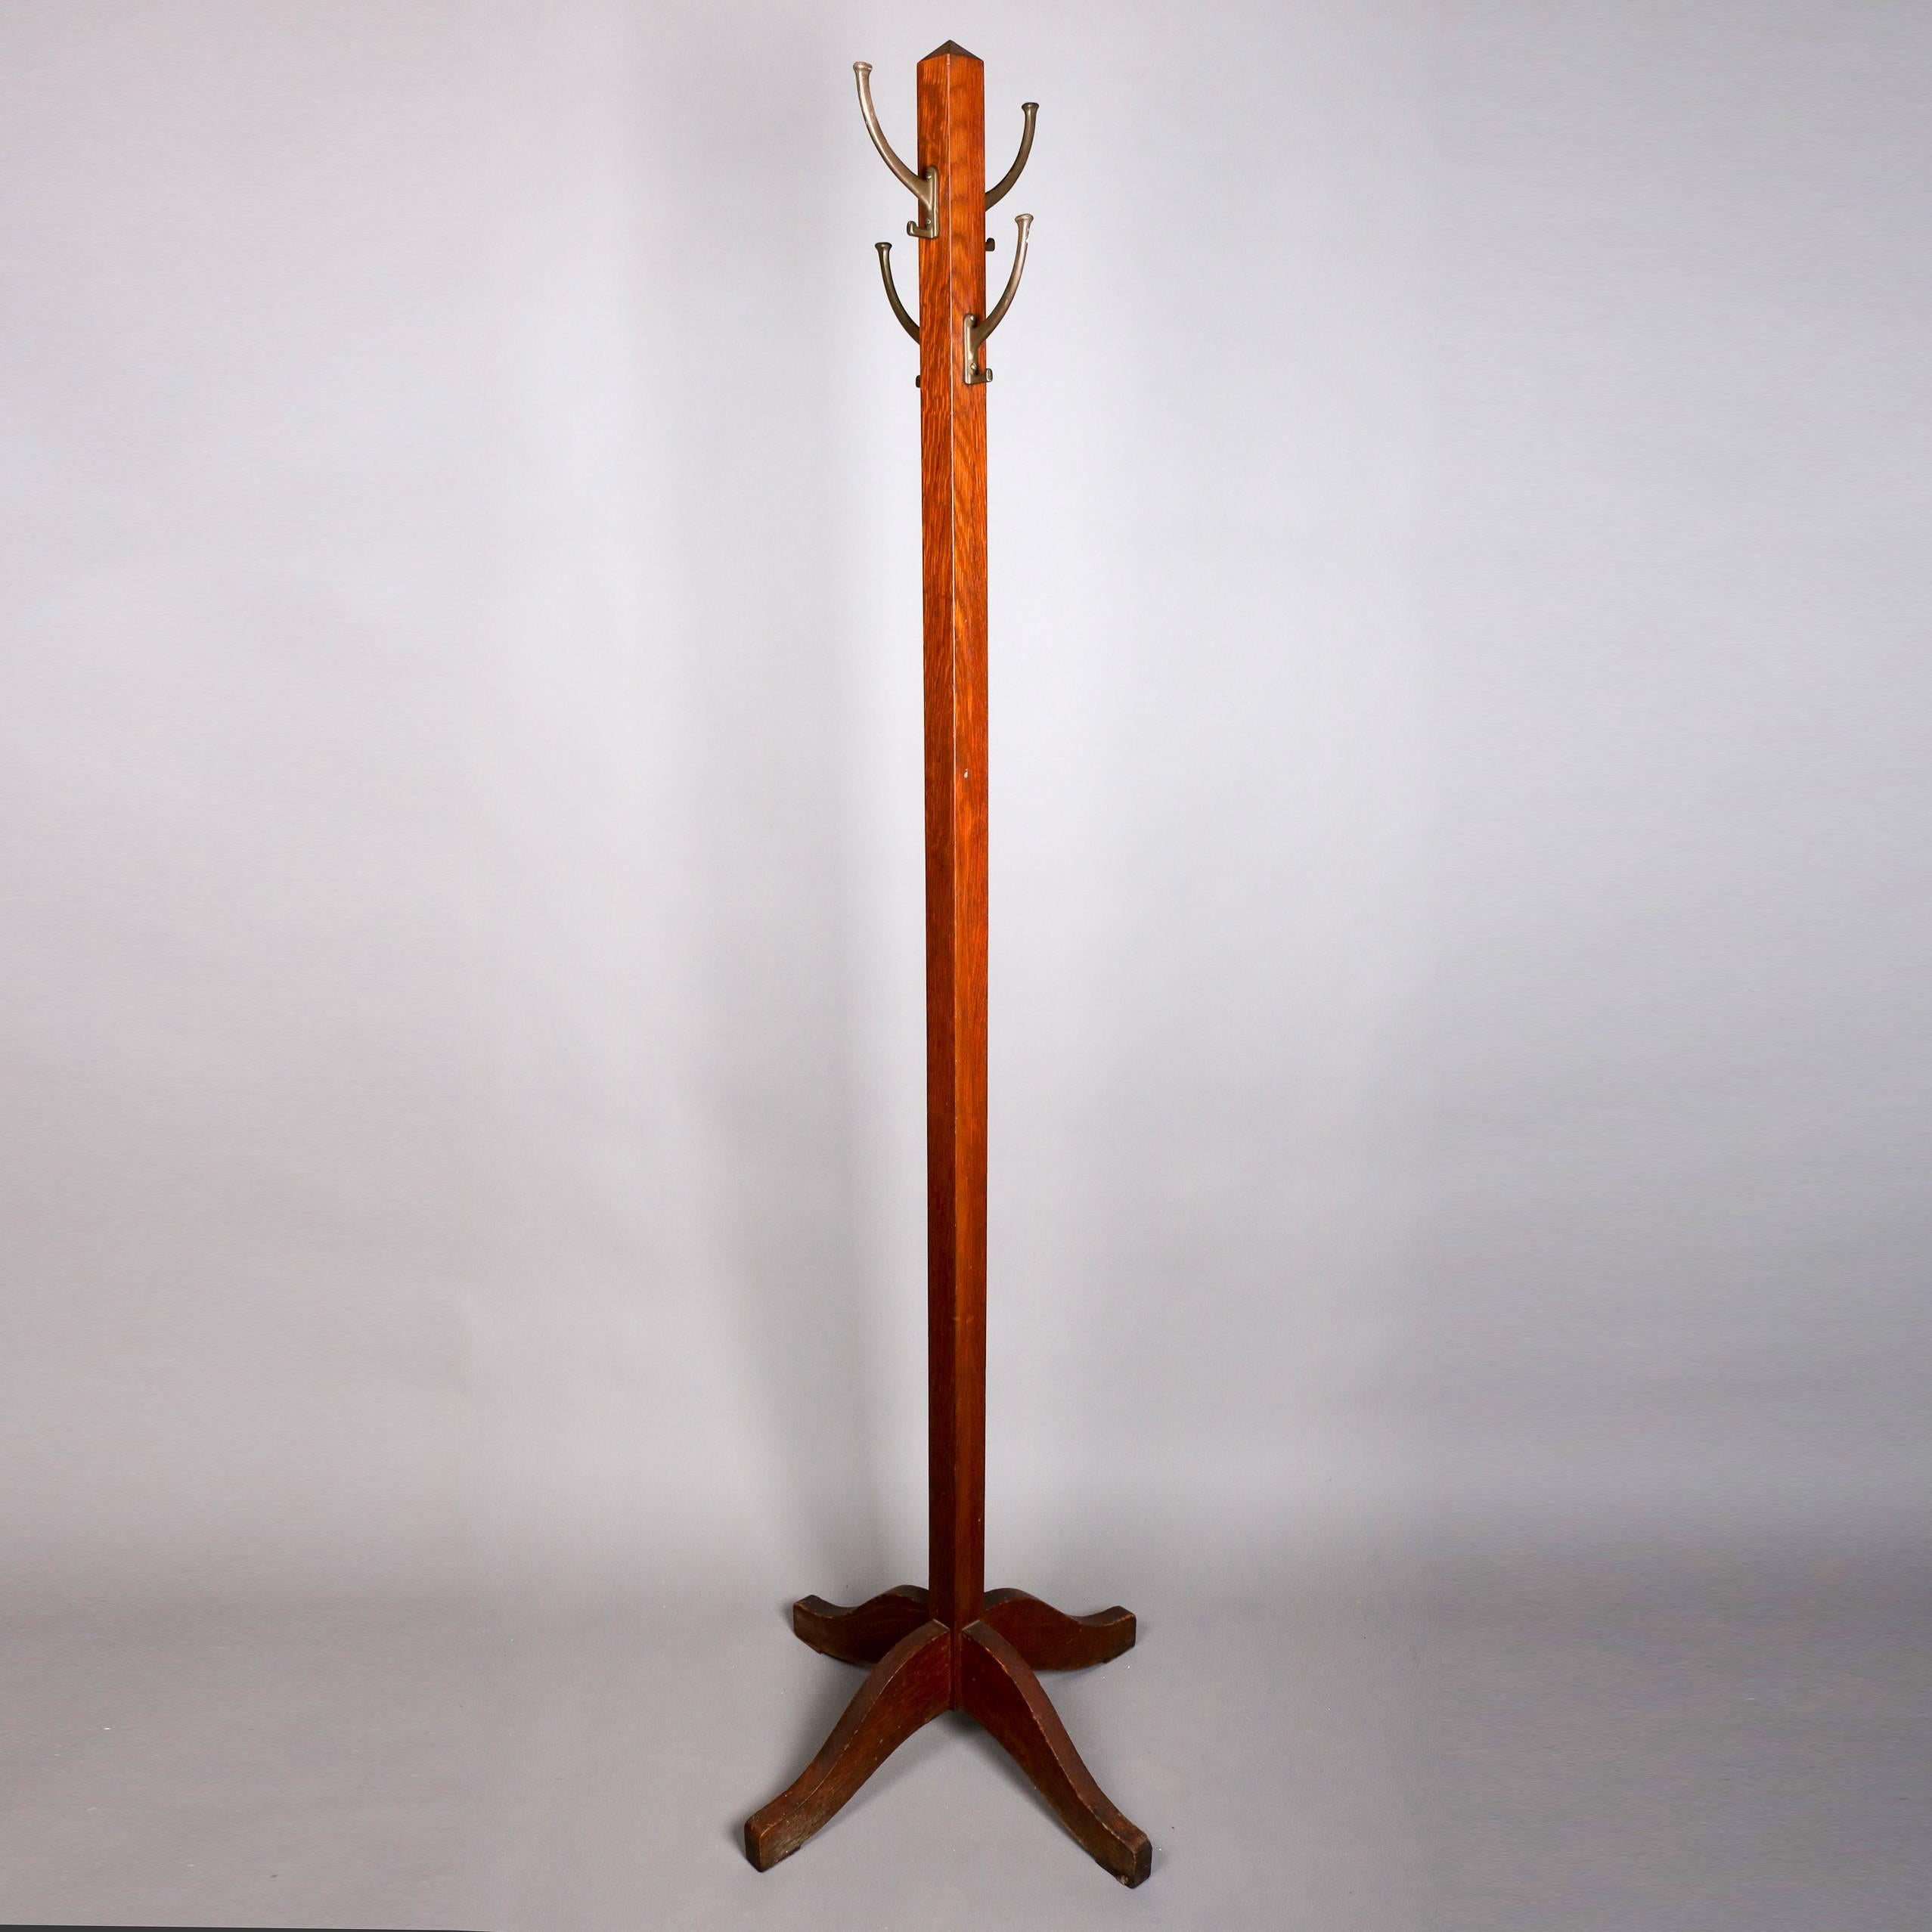 Antique Arts & Crafts mission oak hall tree coat rack with four hooks, early 20th century

Measures - 72